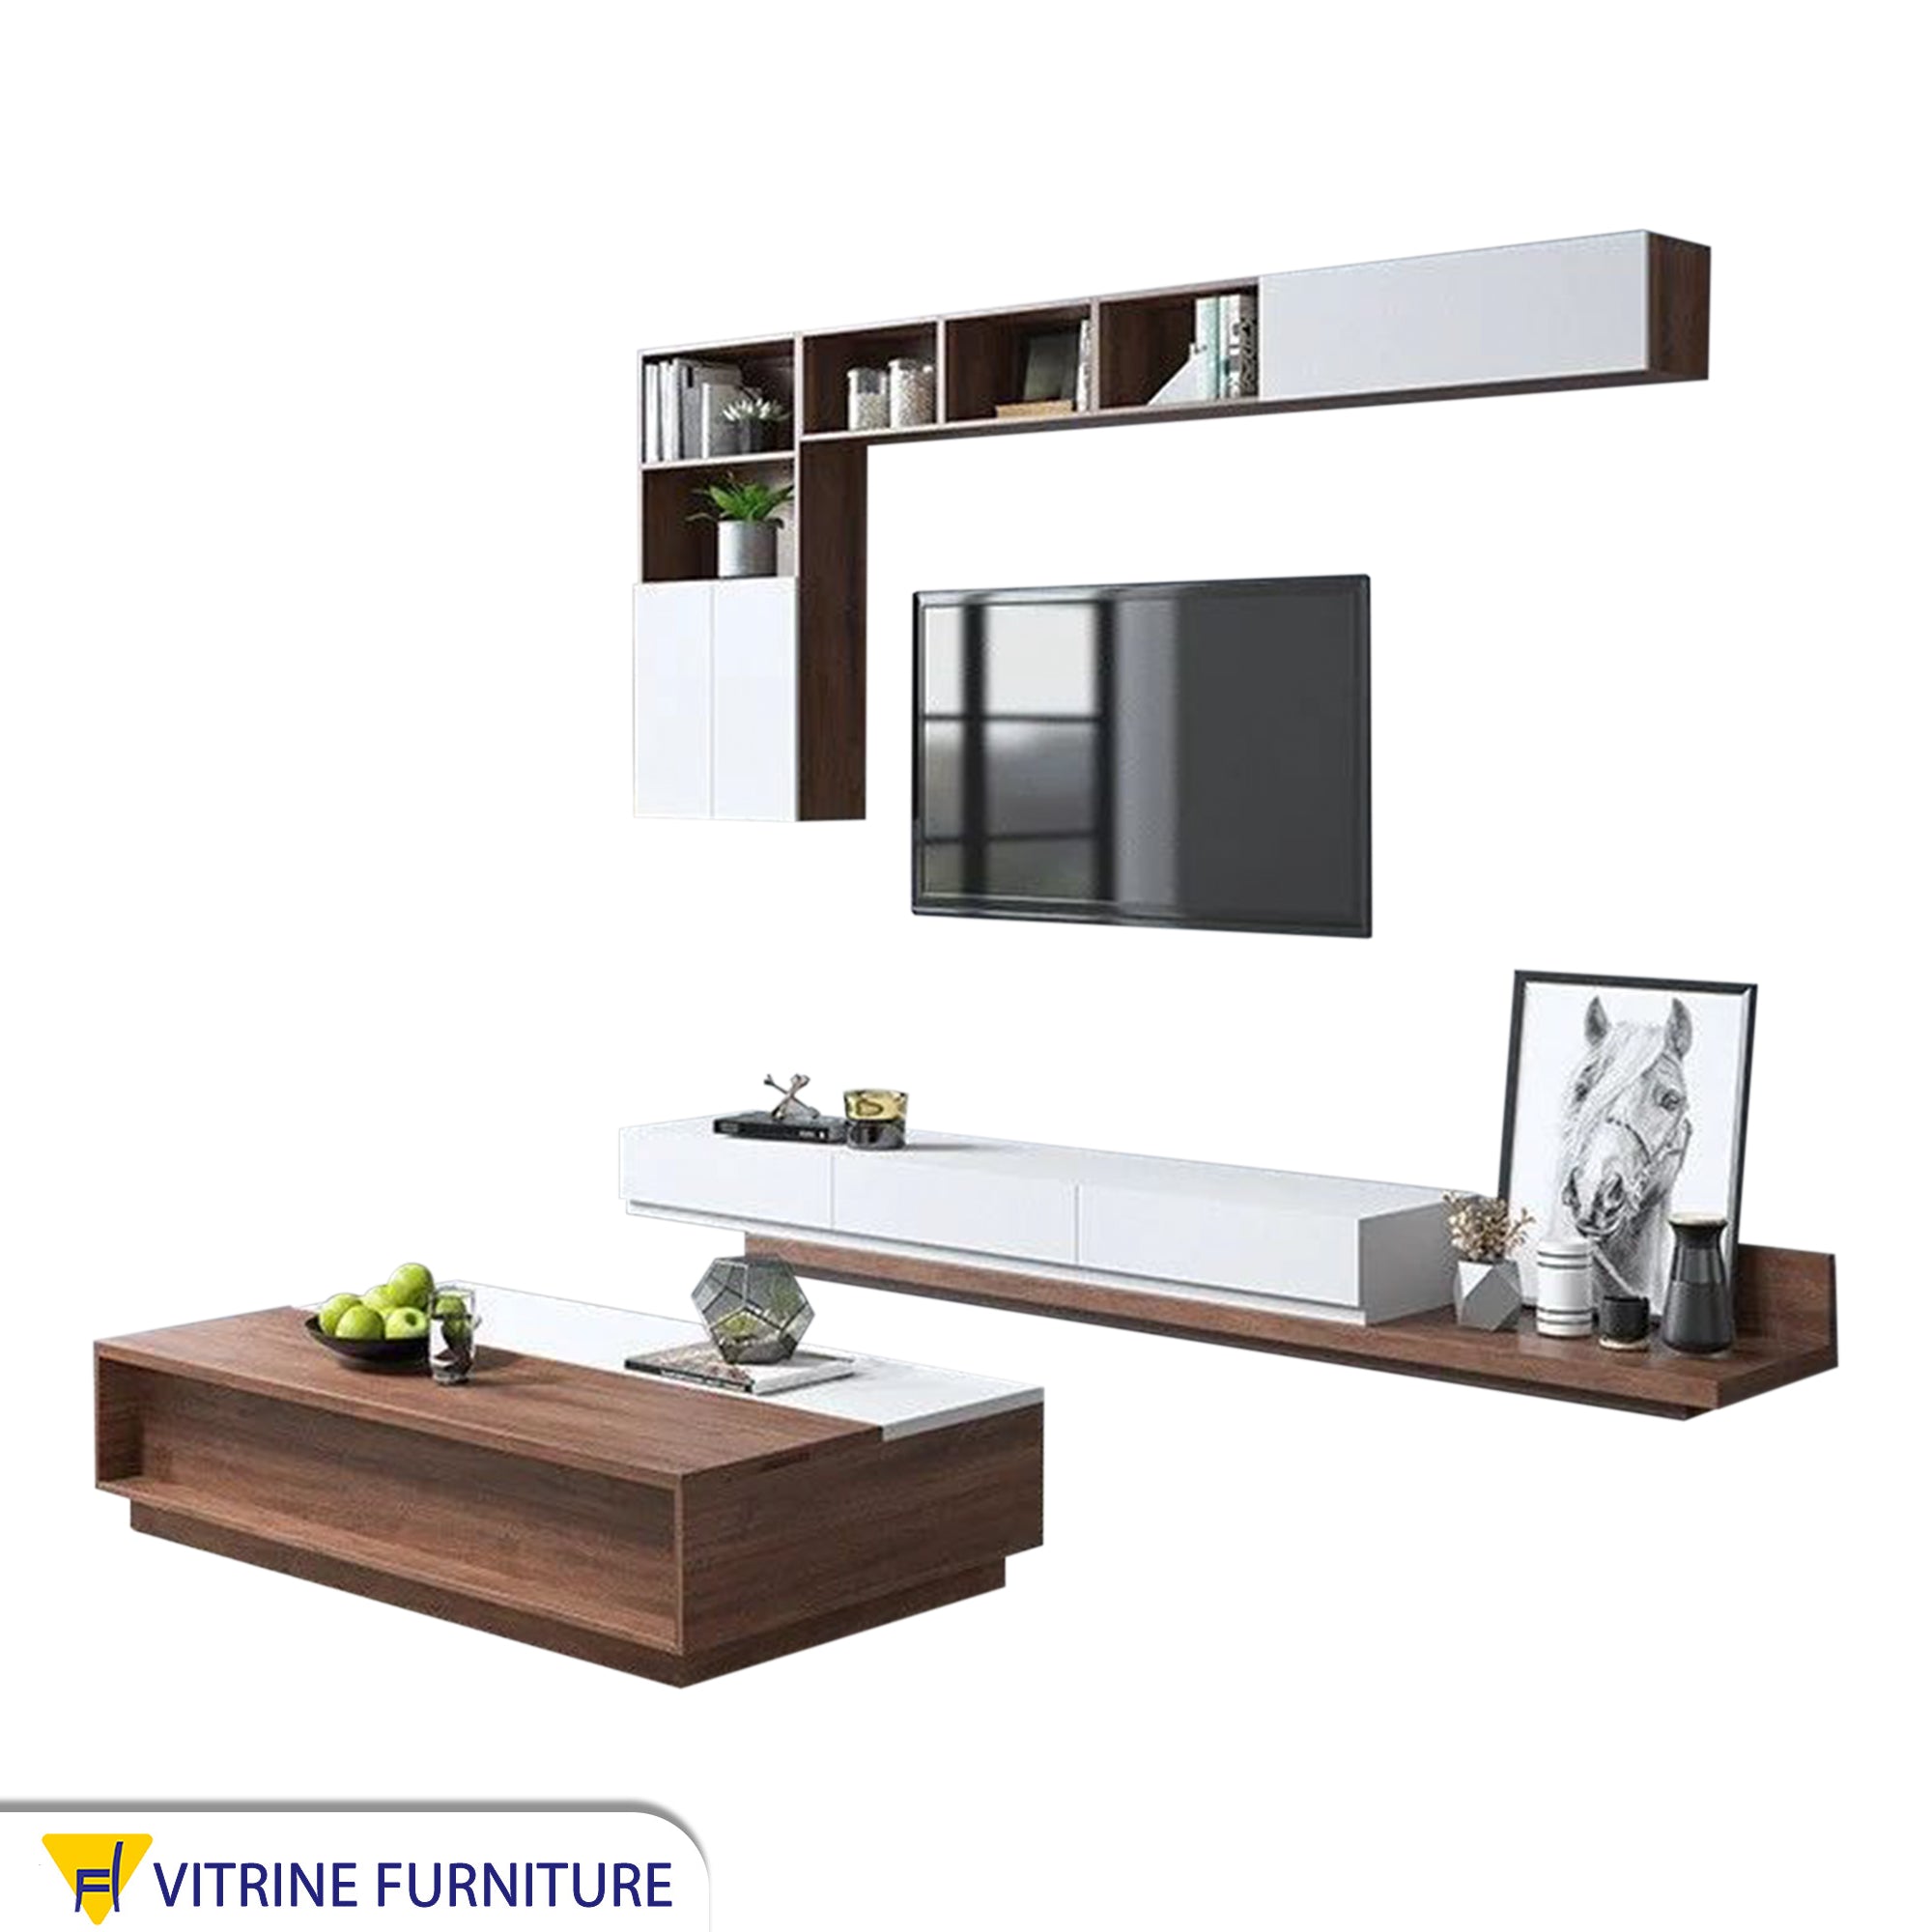 TV unit with multiple pieces and a modern table